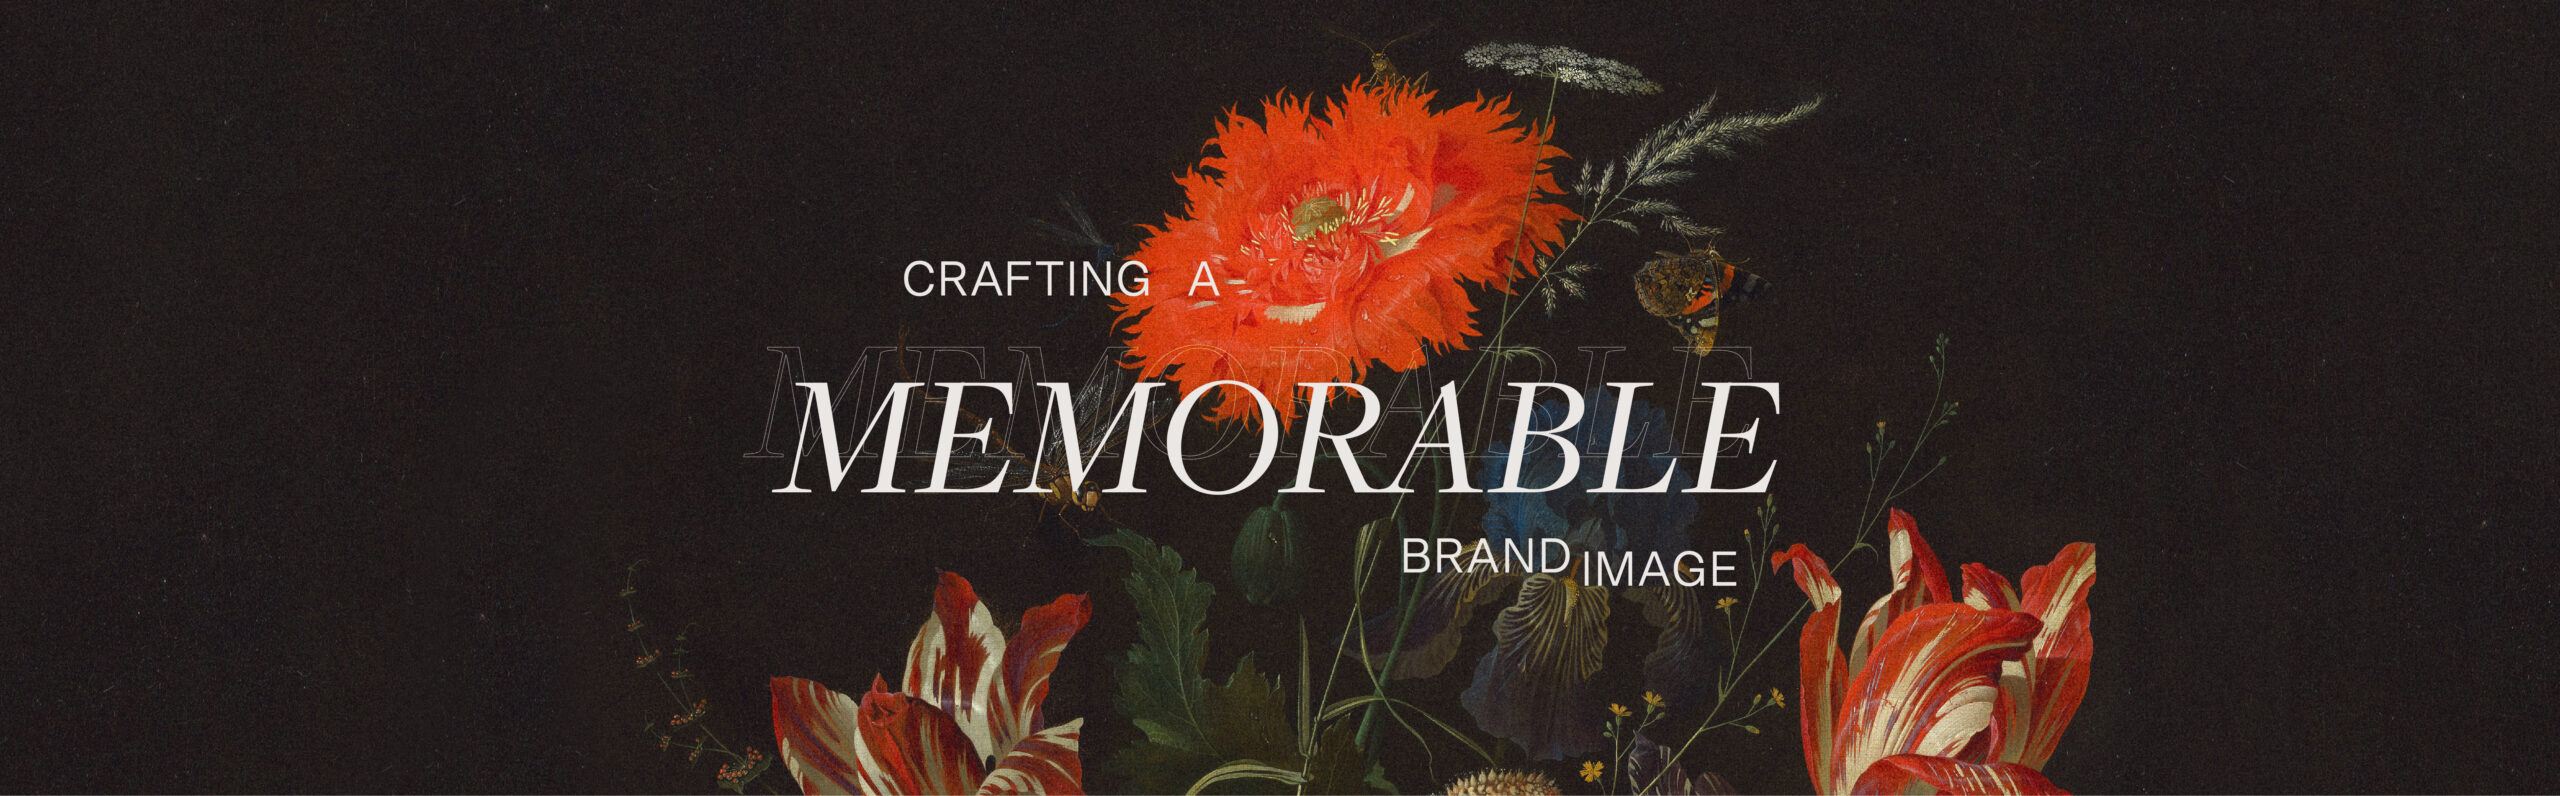 BRANDING + IDENTITY: CRAFTING A MEMORABLE BRAND IMAGE